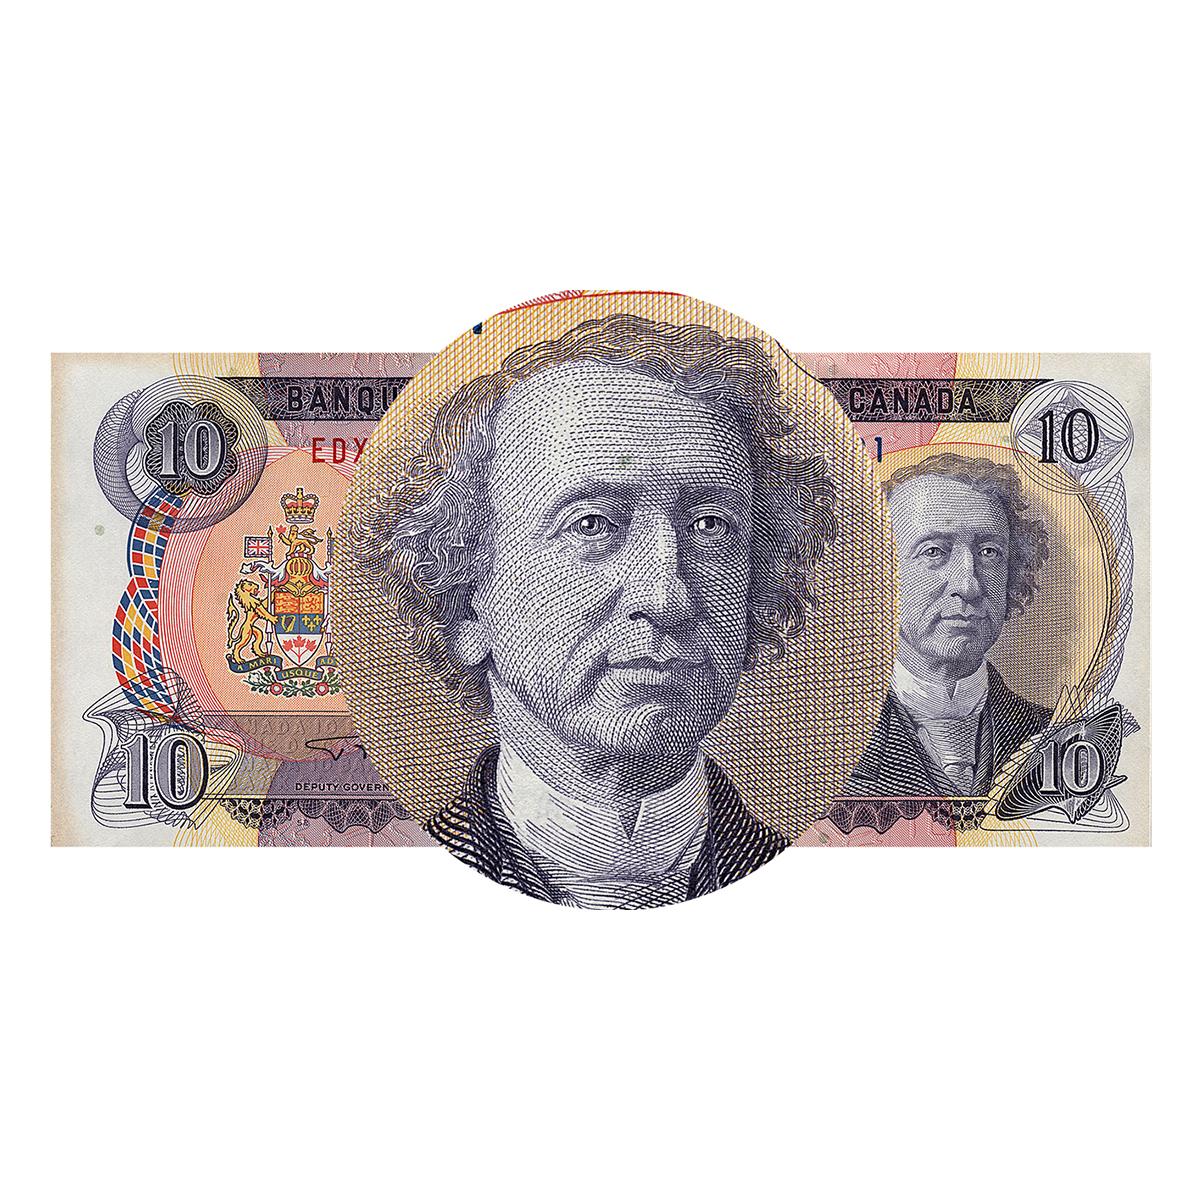 Bank note portrait of middle-aged man with curly hair and in a high collar.